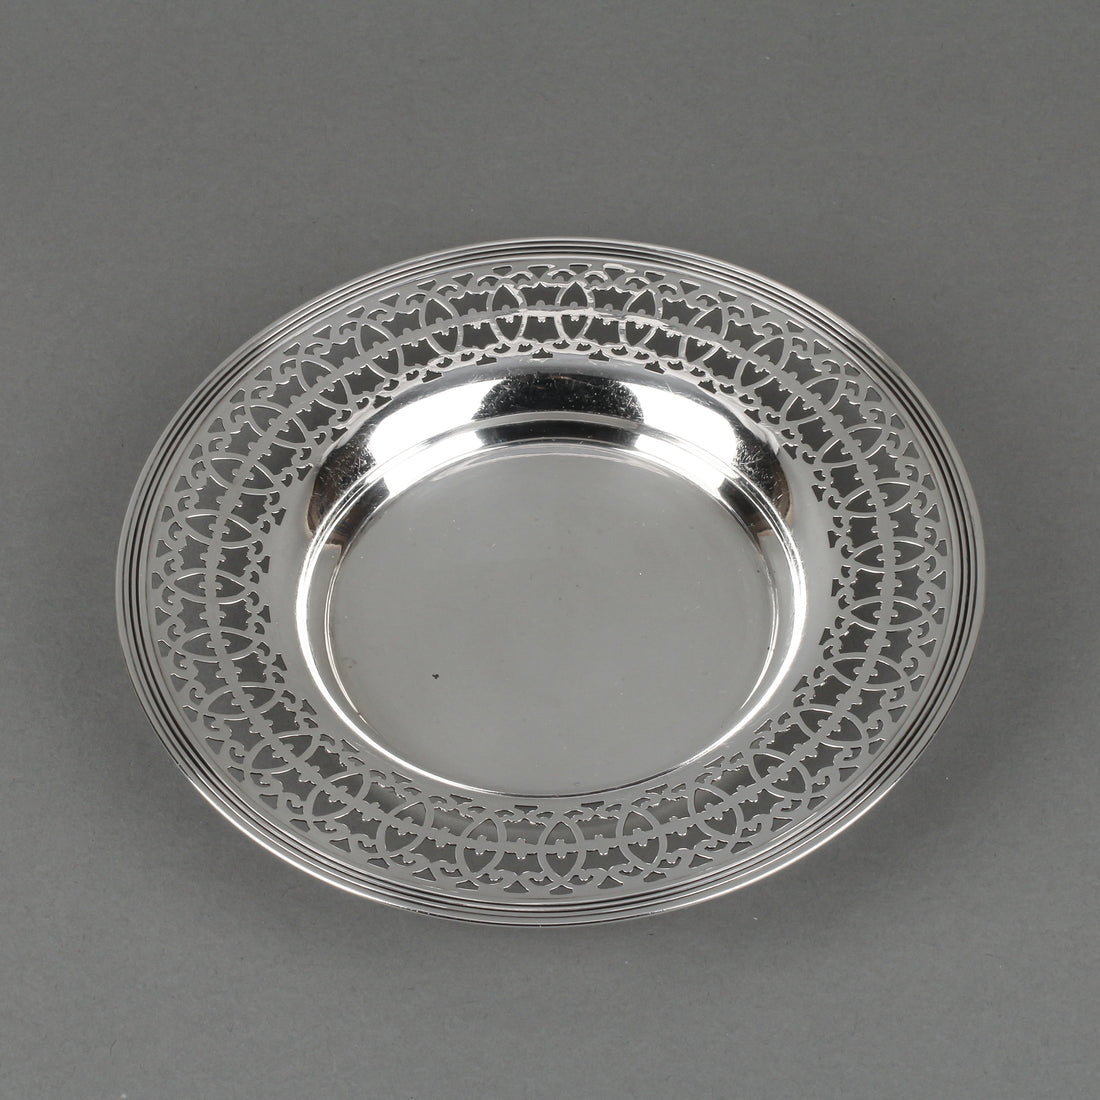 RODEN BROS. Pierced Sterling Silver Butter Dish